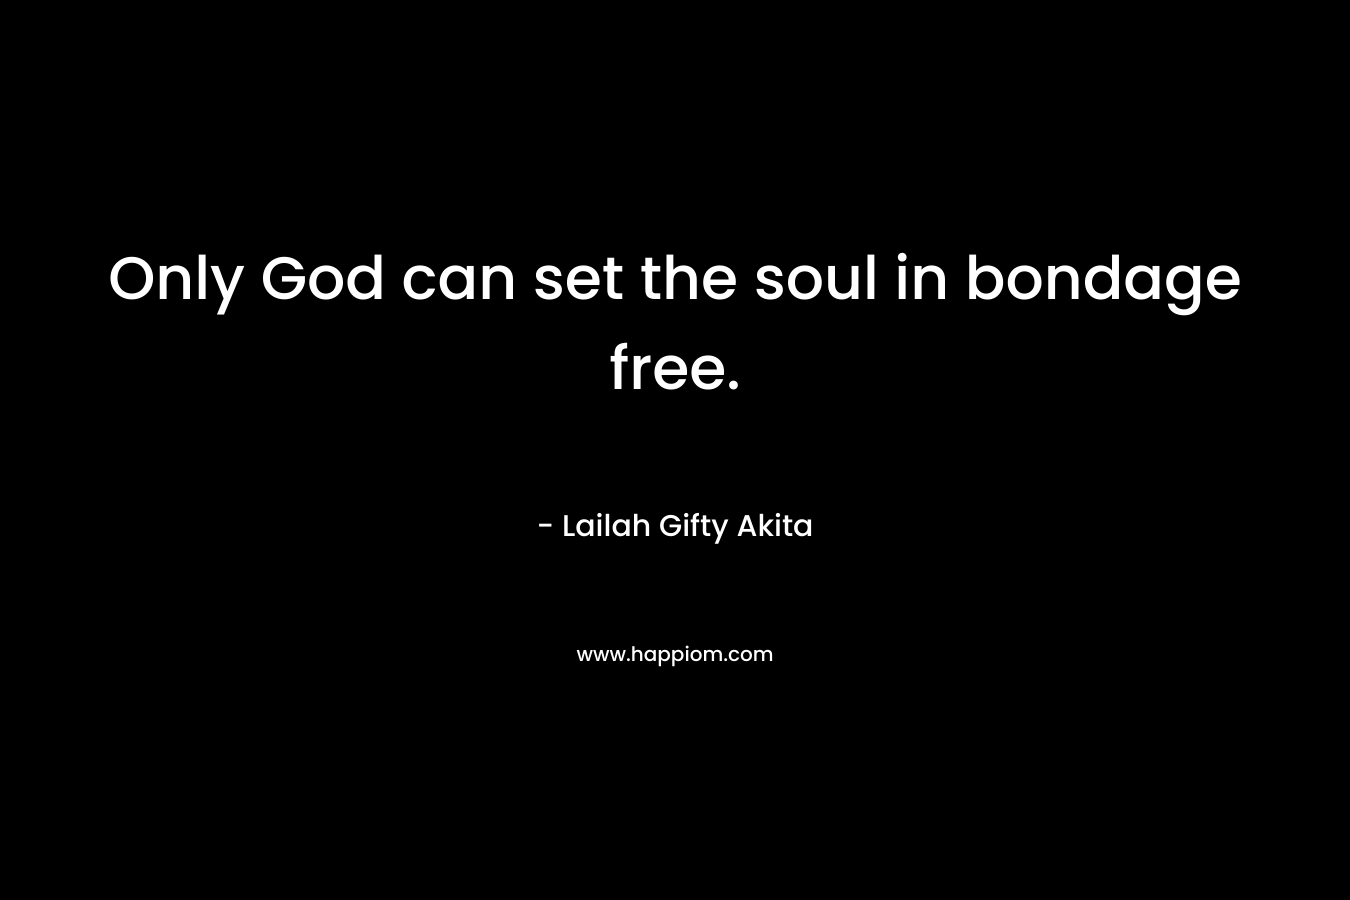 Only God can set the soul in bondage free.